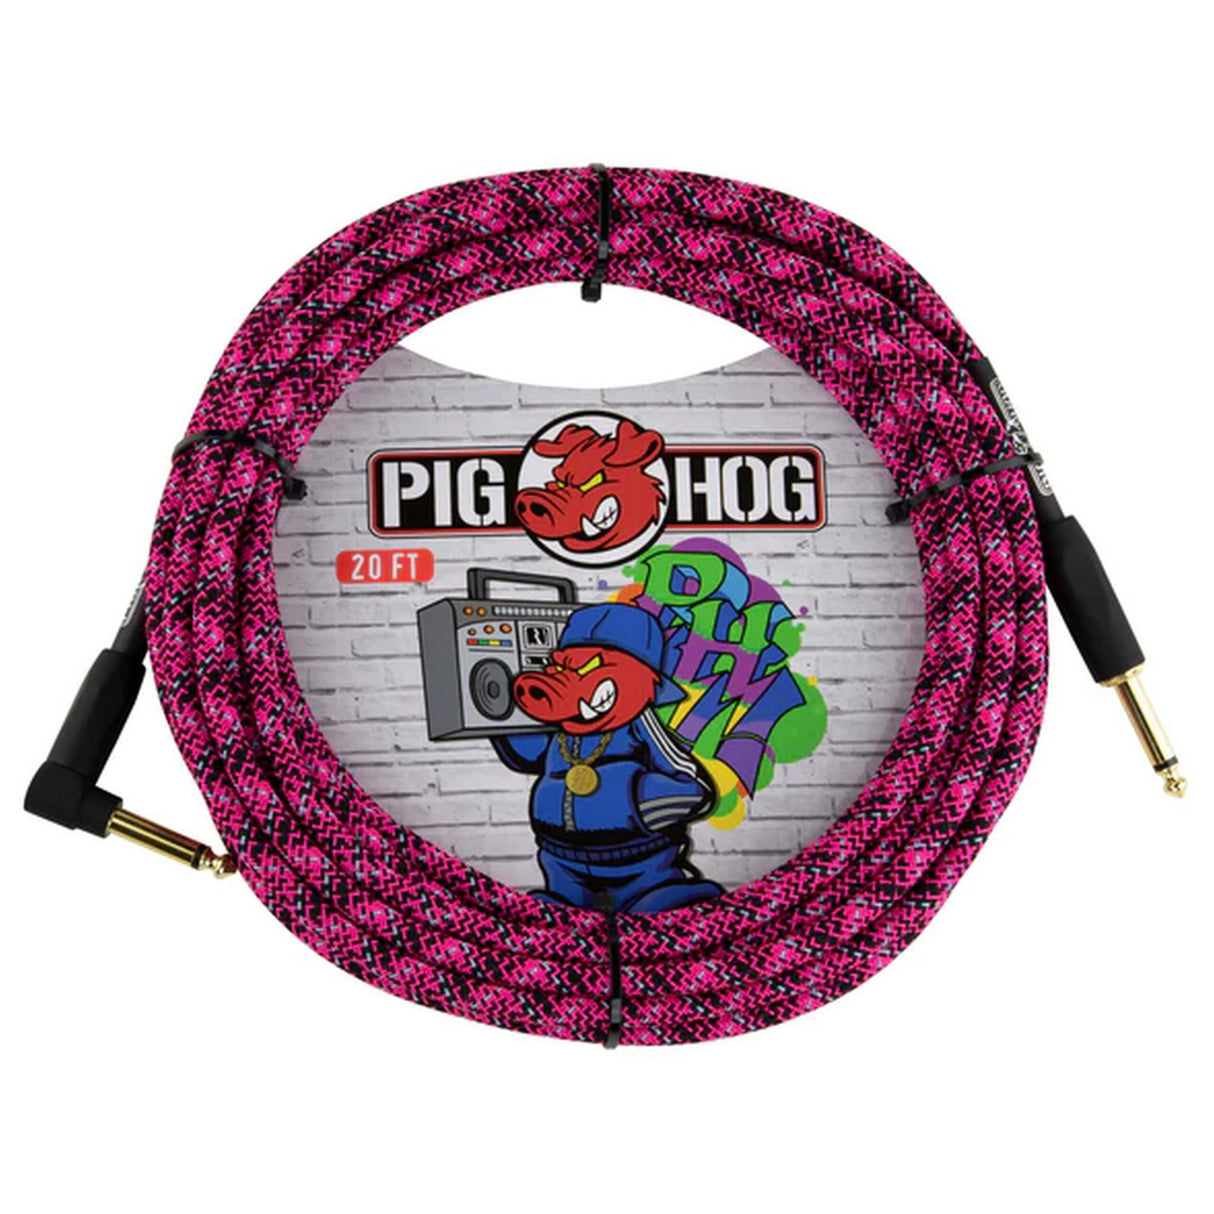 Pig Hog PCH20GPKR Pink Graffiti Instrument Cable, 20-Feet Right Angle